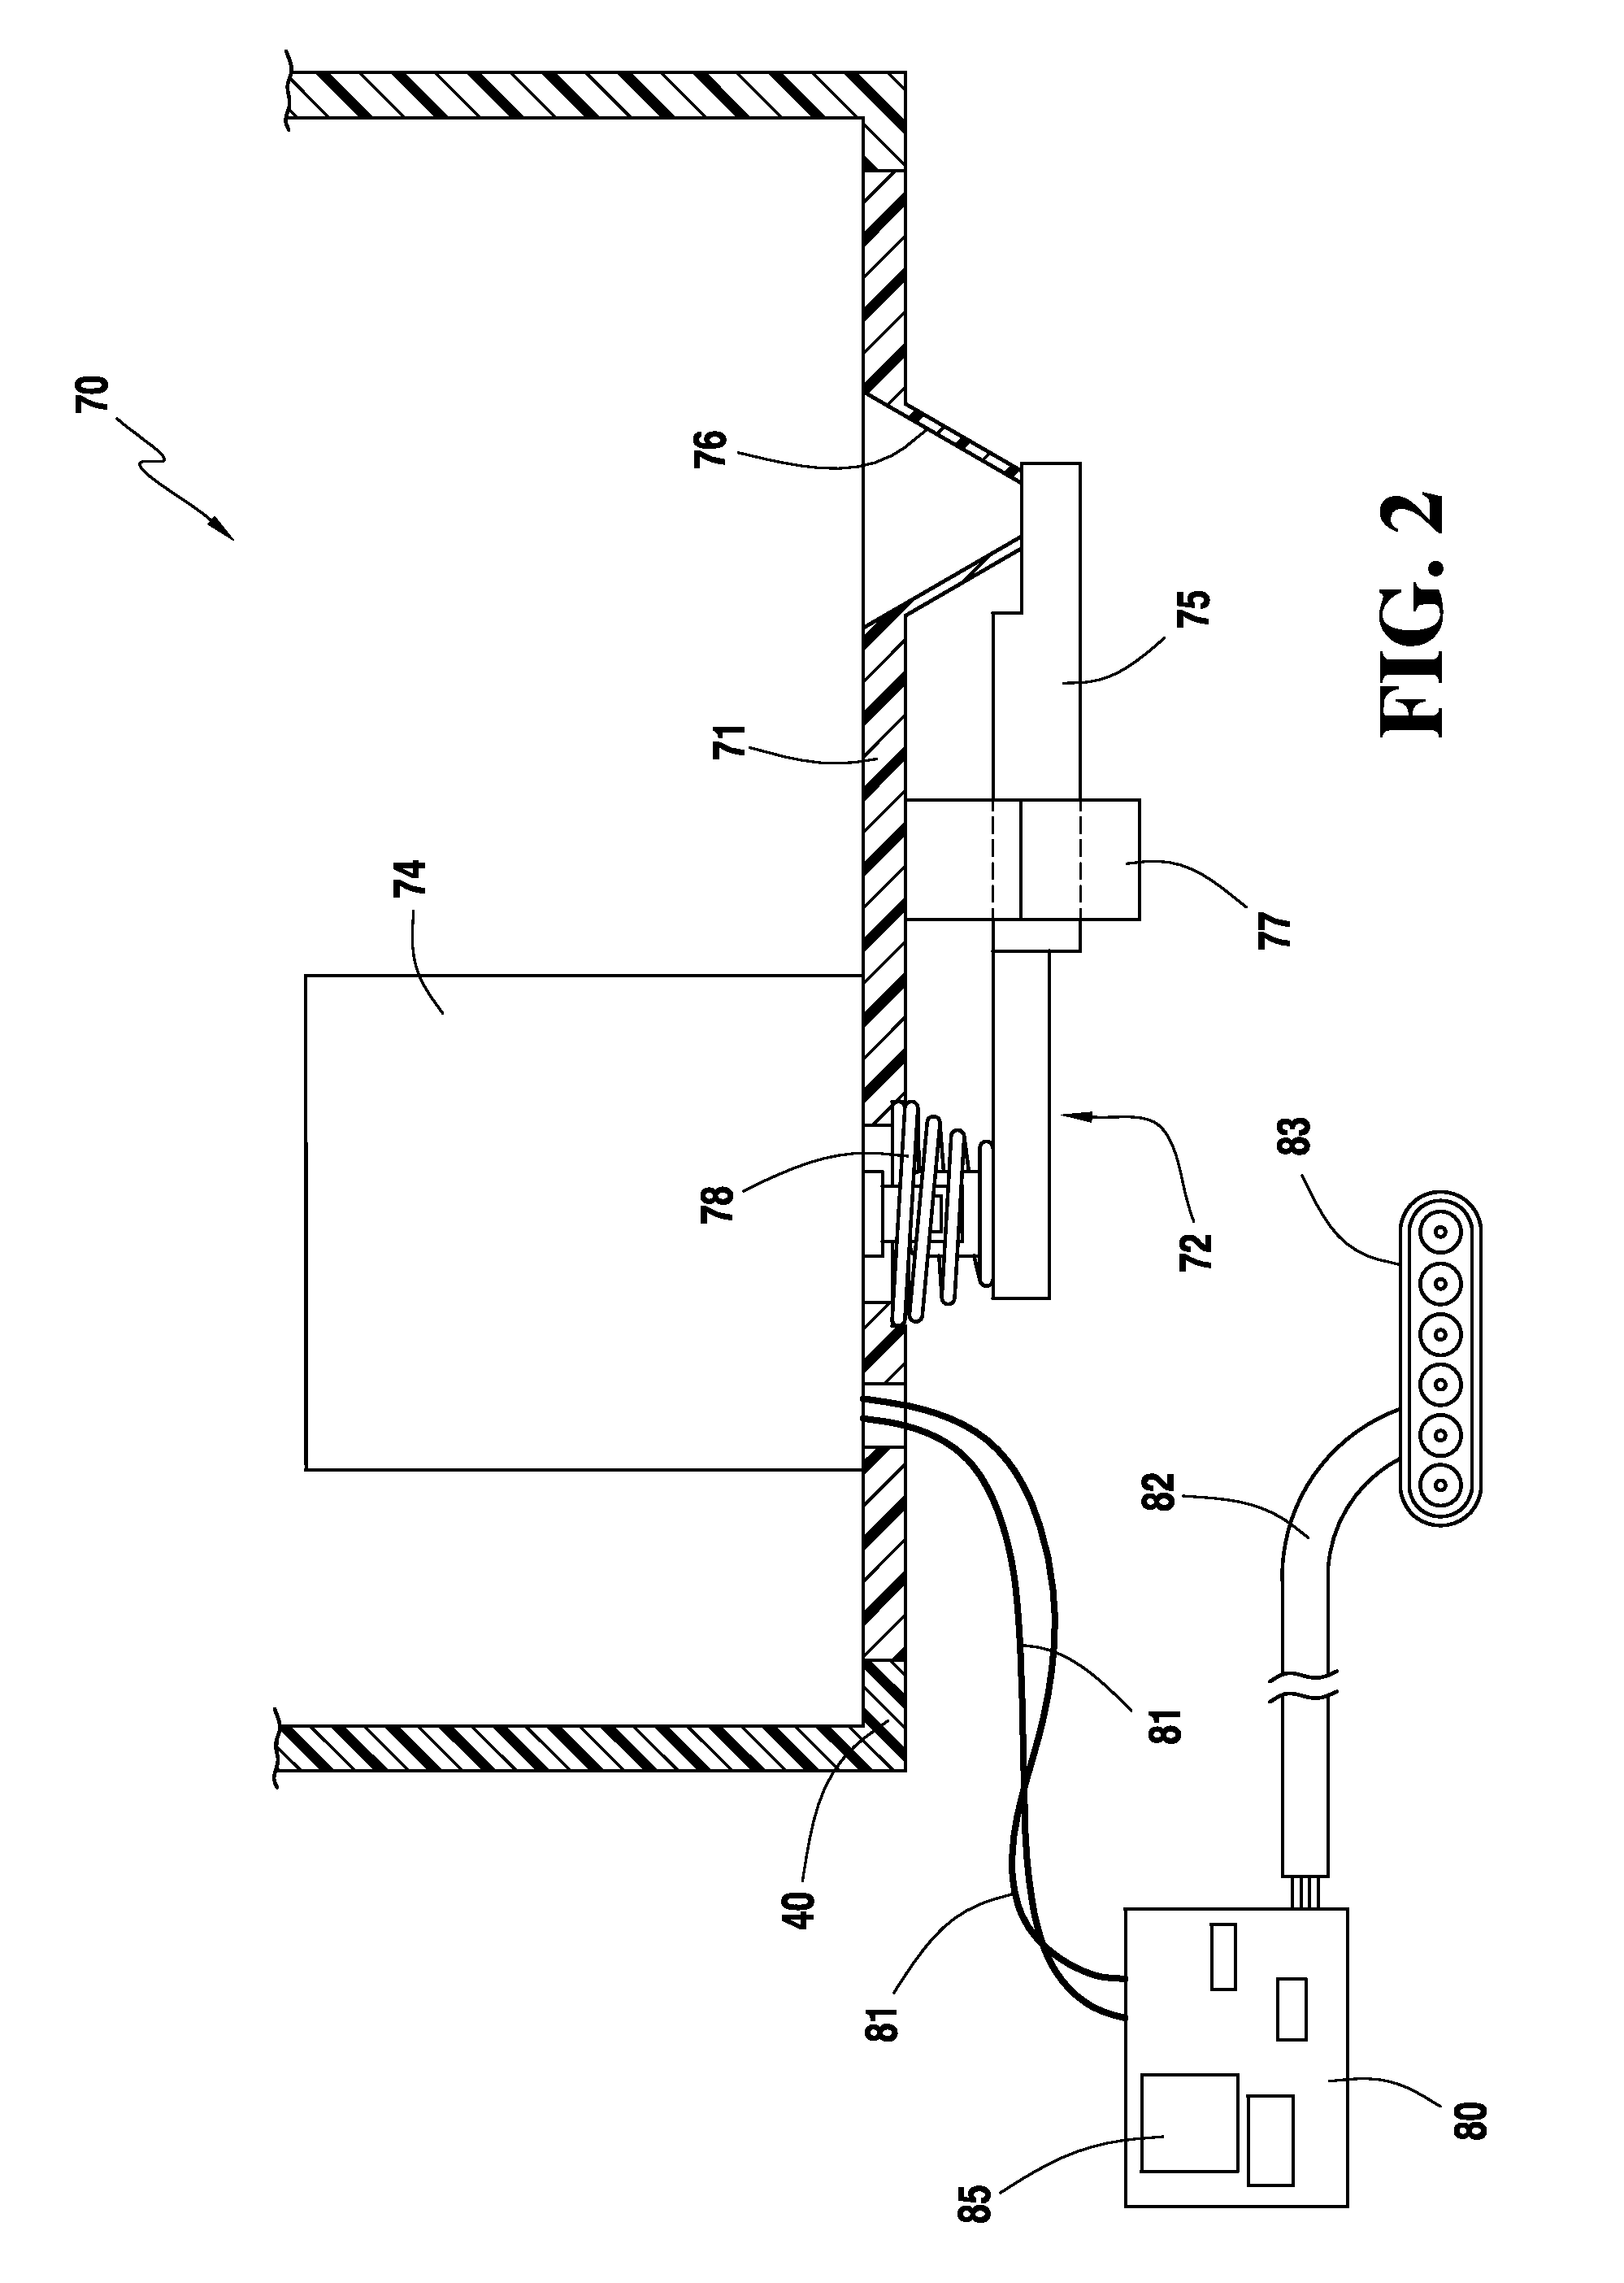 System and process for dispensing multiple and low rate agricultural products